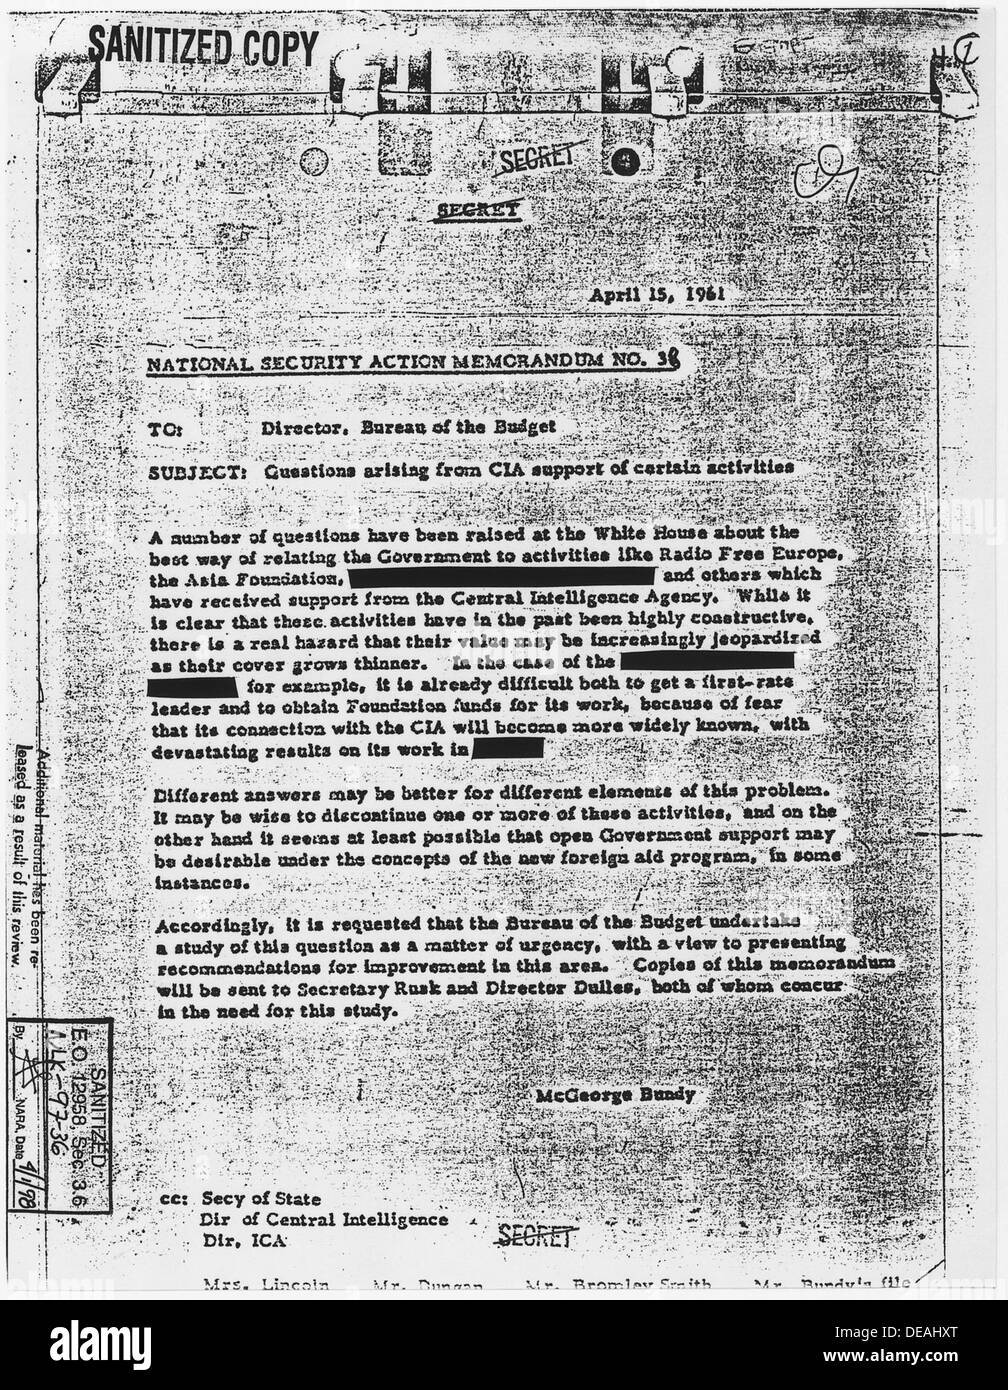 National Security Action Memorandum No. 38 Questions arising from CIA support of certain activities 193438 Stock Photo